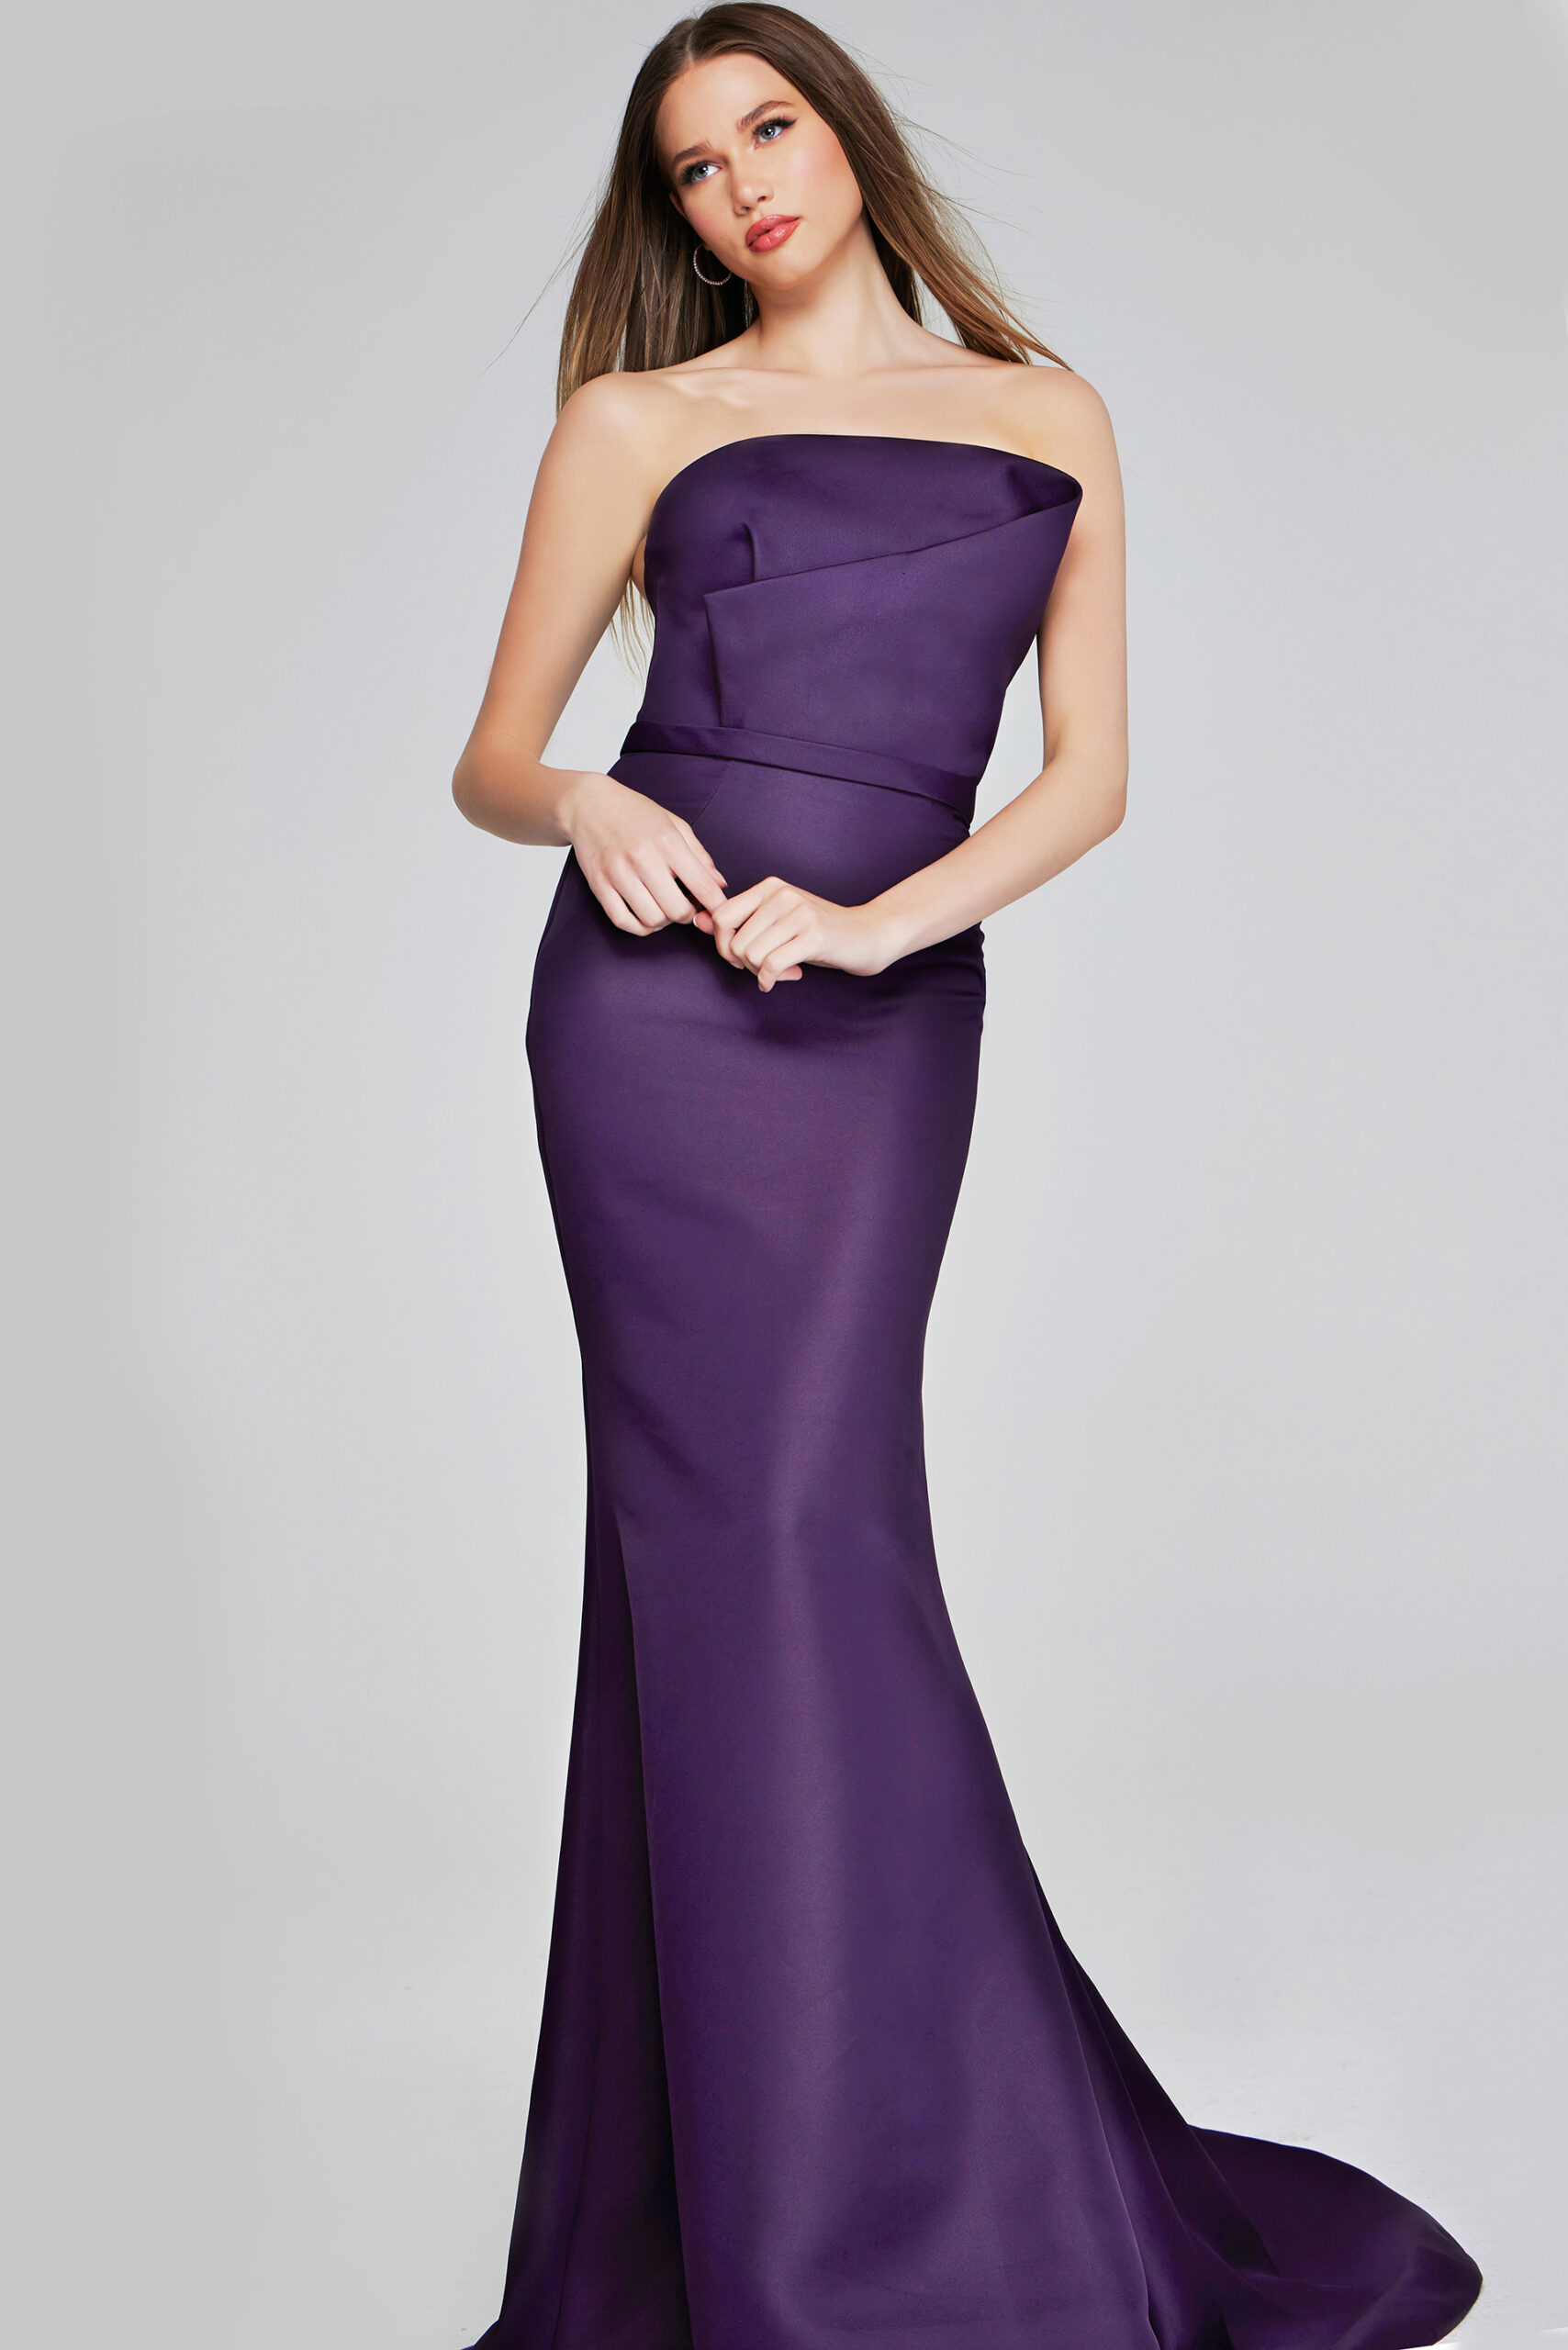 Classic Eggplant Strapless Gown with Elegant Silhouette 40598